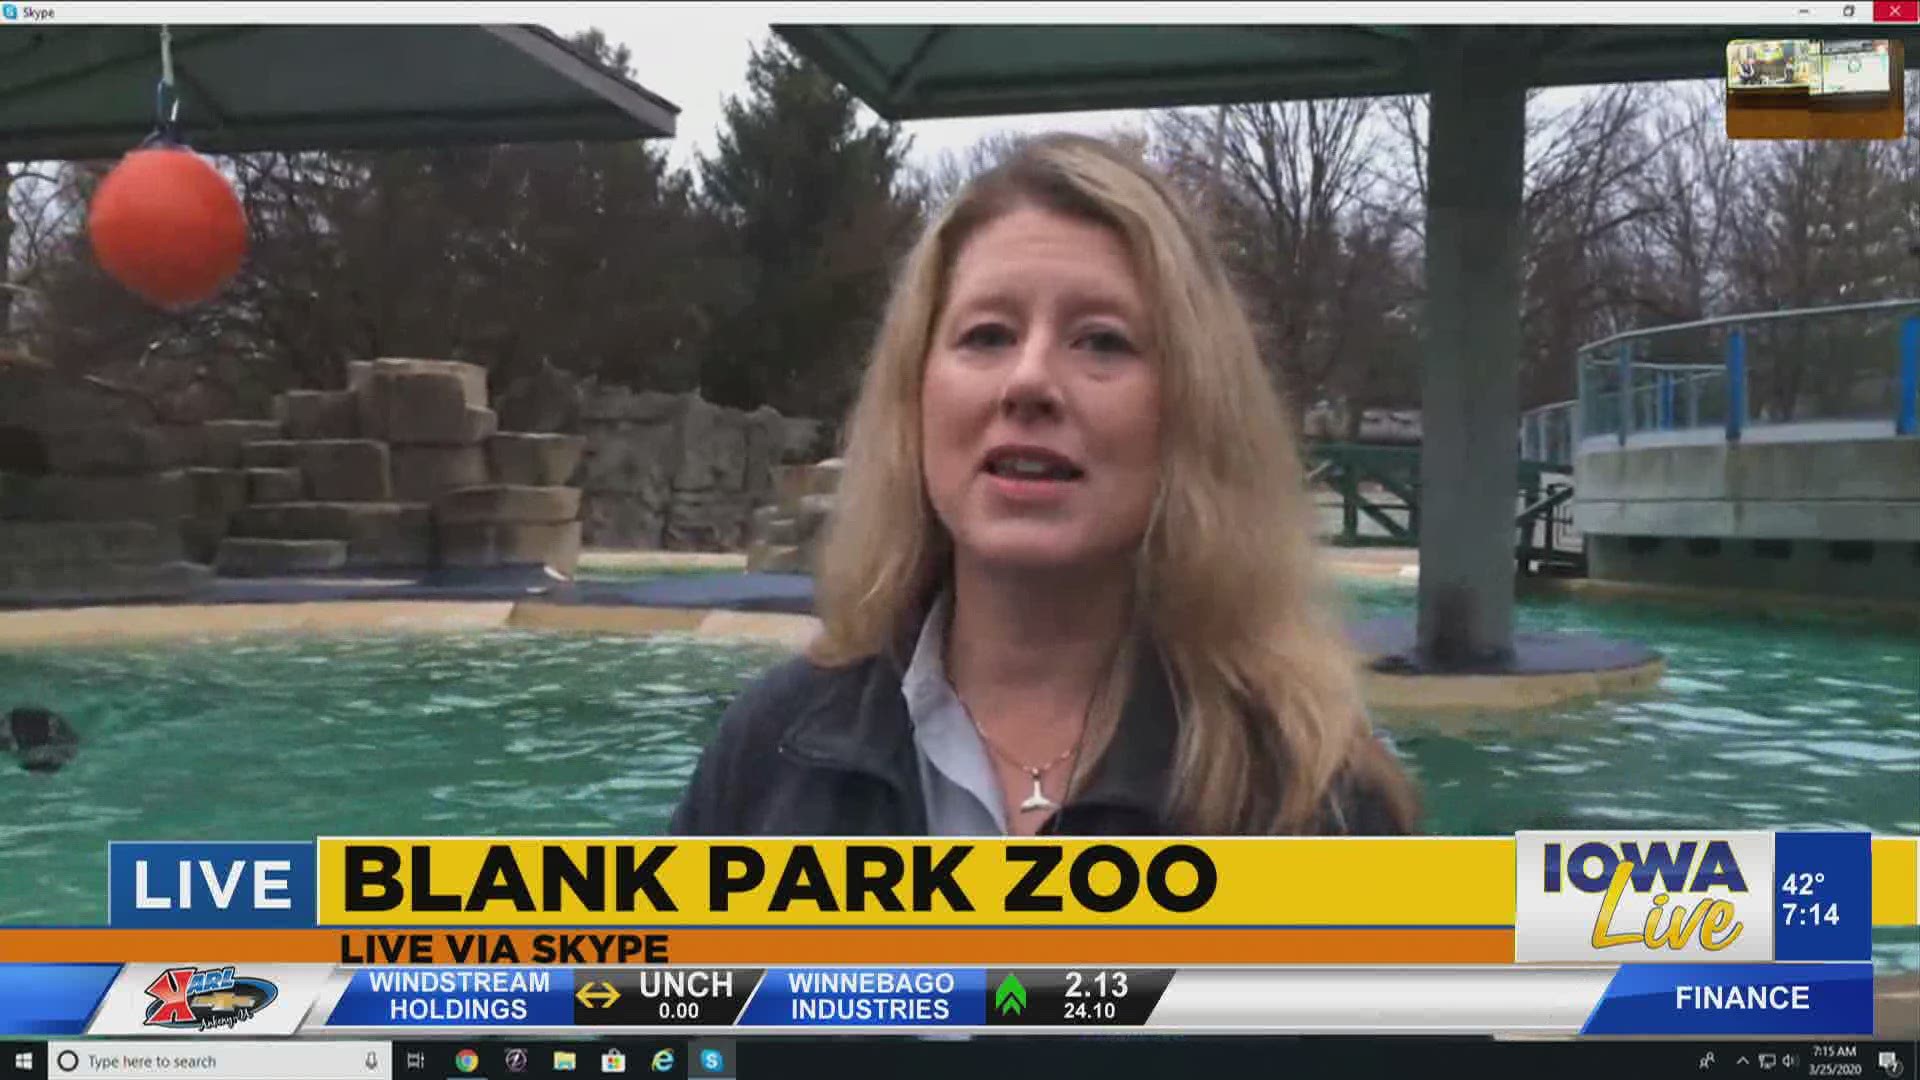 The Blank Park Zoo has increased their presence on Facebook with live videos featuring educational activities, keeper chats, animal webcams and more